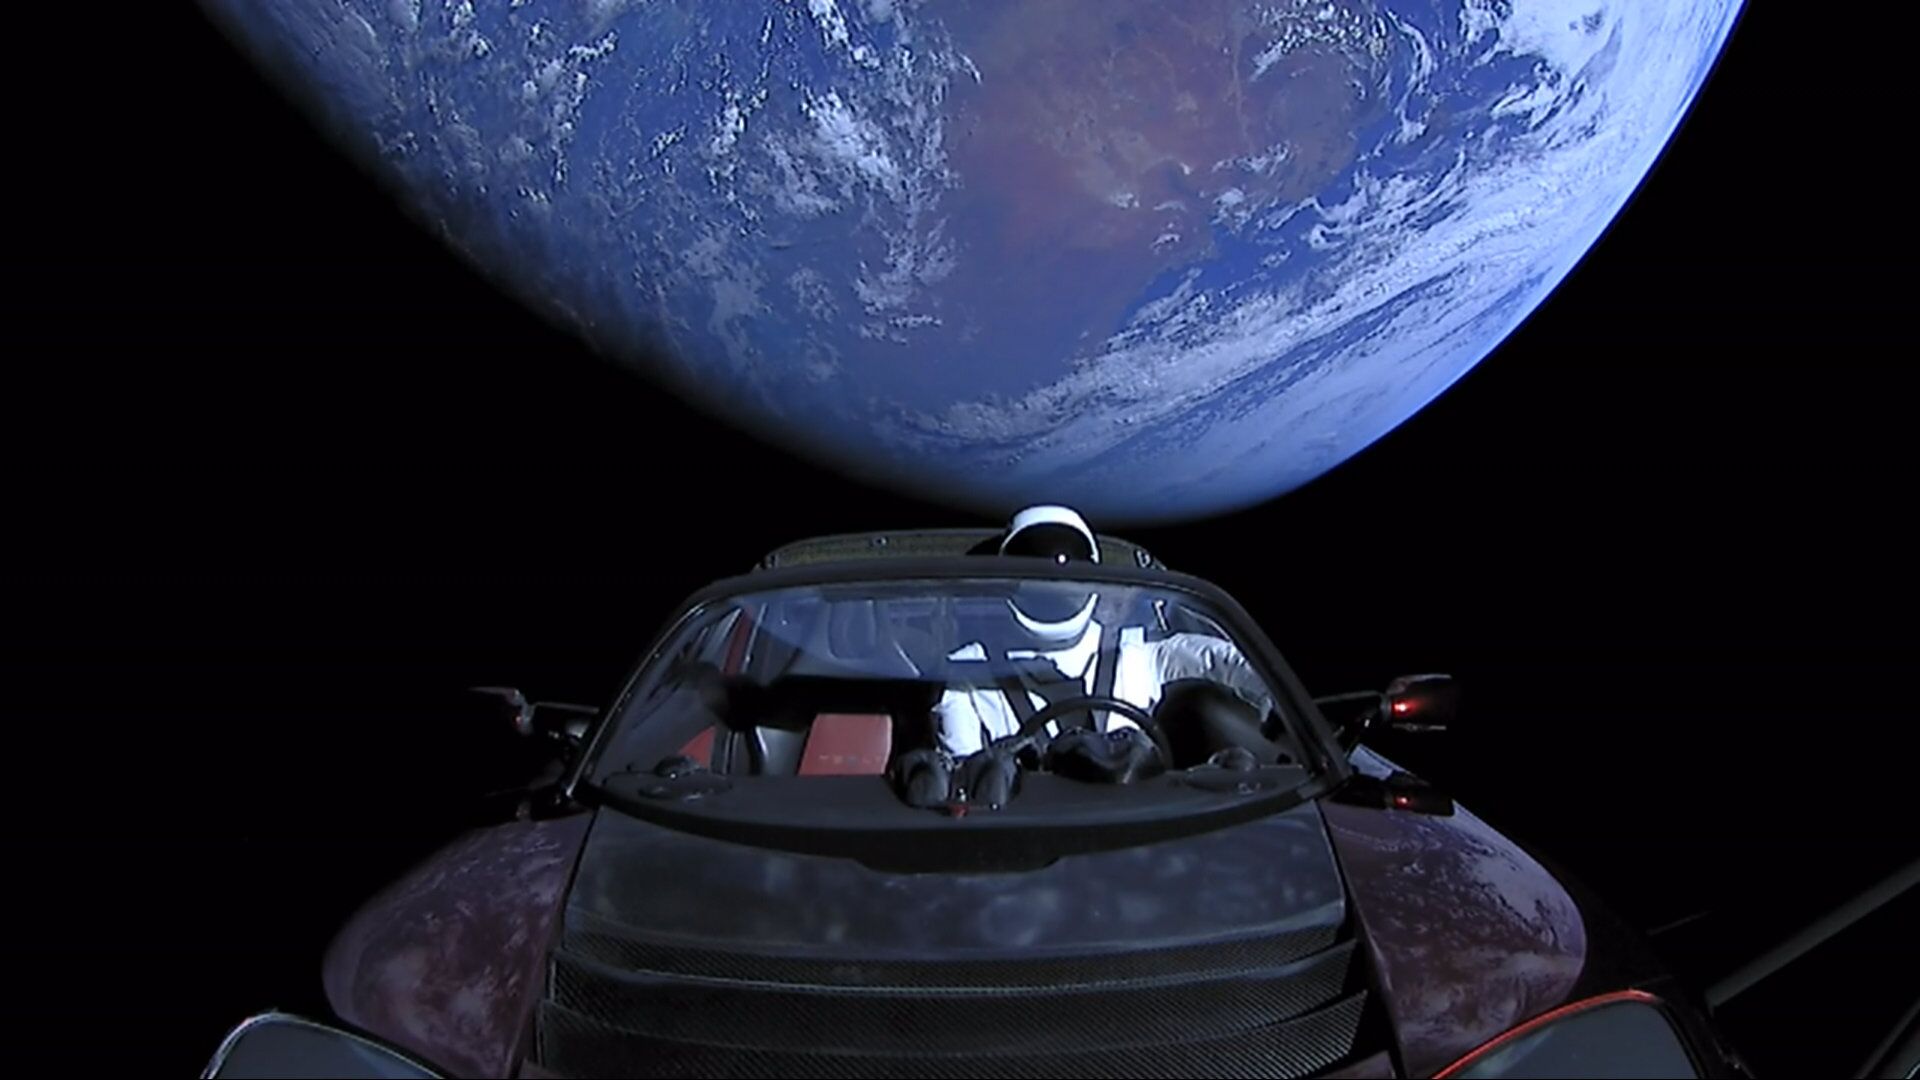 SpaceX CEO Elon Musk's own car, a red Tesla Roadster cabrio, entered into orbit via a Falcon Heavy launcher, with a dummy wearing a spacesuit at the steering wheel. - Sputnik International, 1920, 09.02.2022